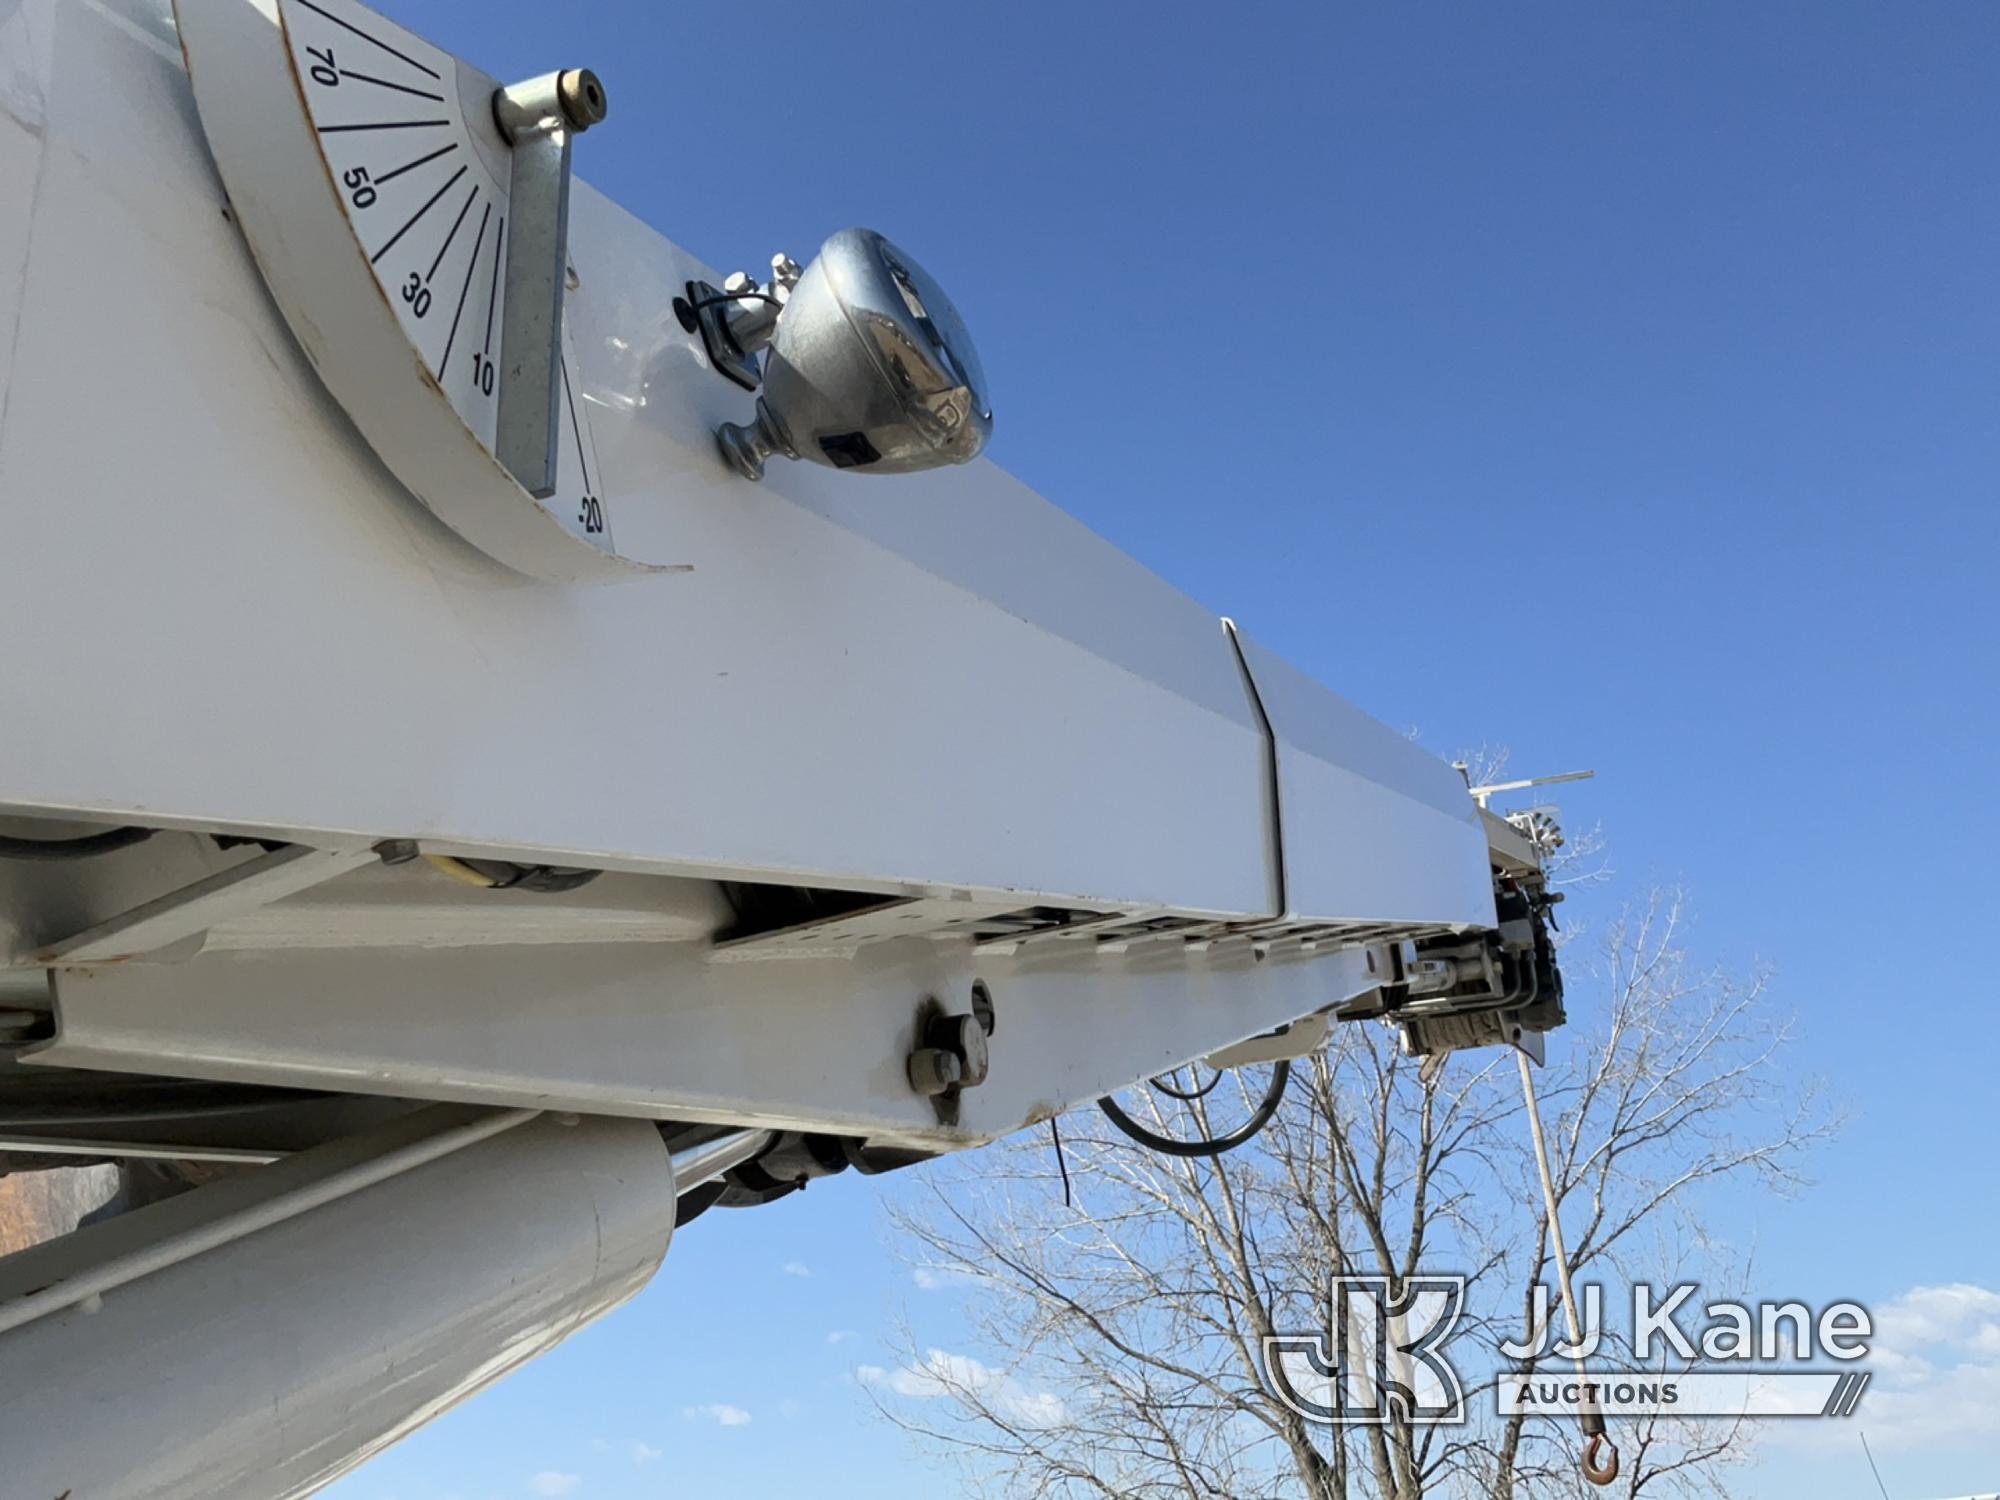 (Des Moines, IA) Altec DM45-BR, Digger Derrick rear mounted on 2013 Freightliner M2 106 T/A Utility